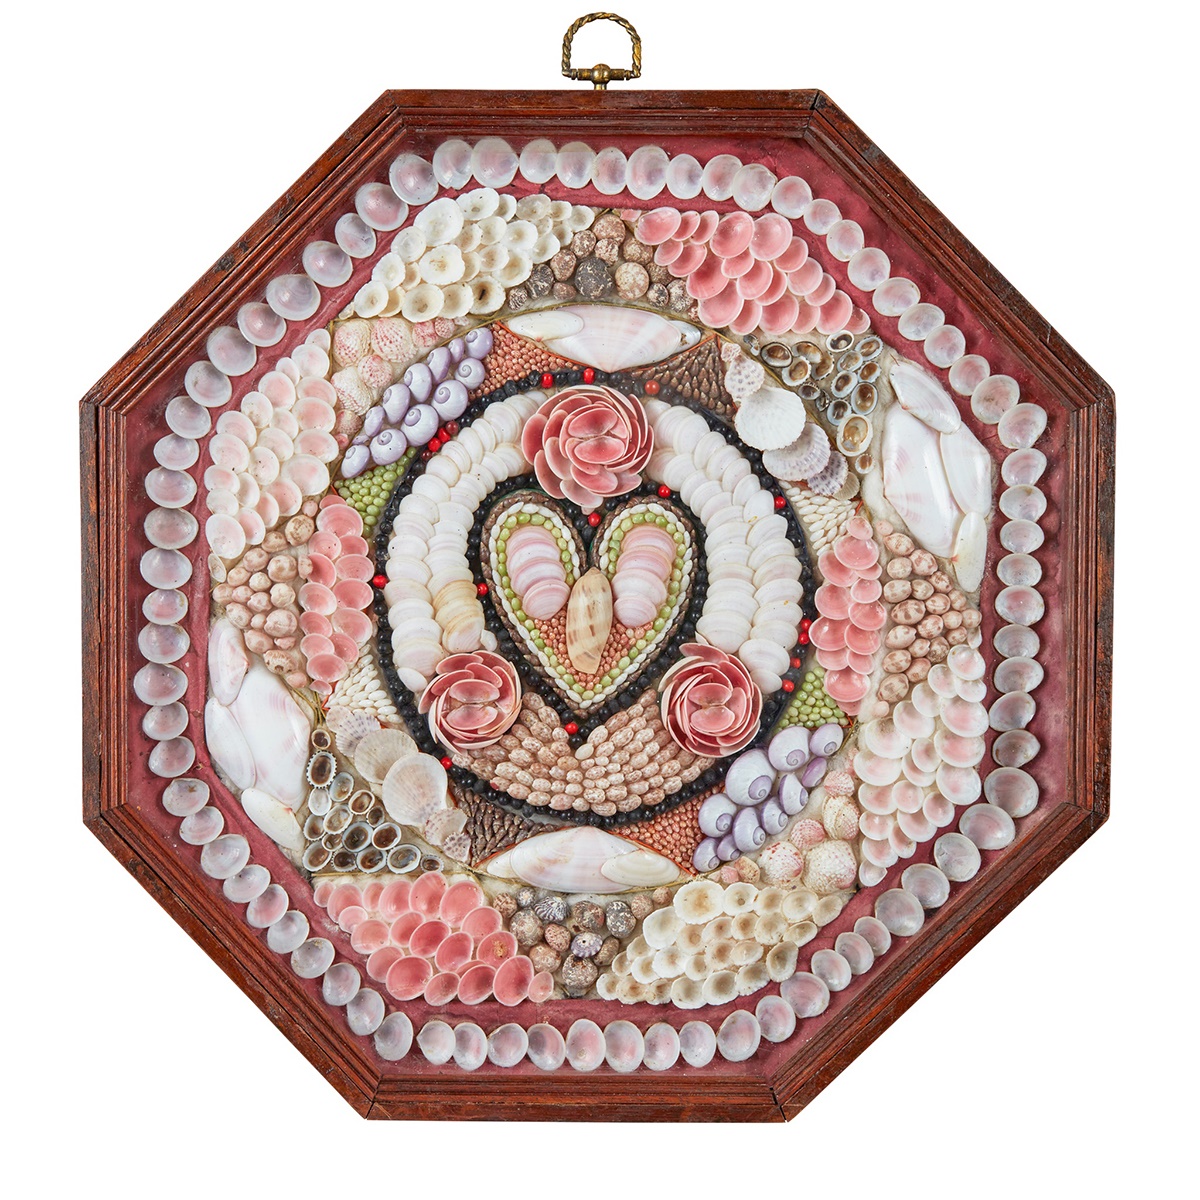 LOT 298 | WEST INDIAN SHELLWORK OCTAGONAL SAILOR'S VALENTINE | MID 19TH CENTURY | £1,200 - £1,800 + fees